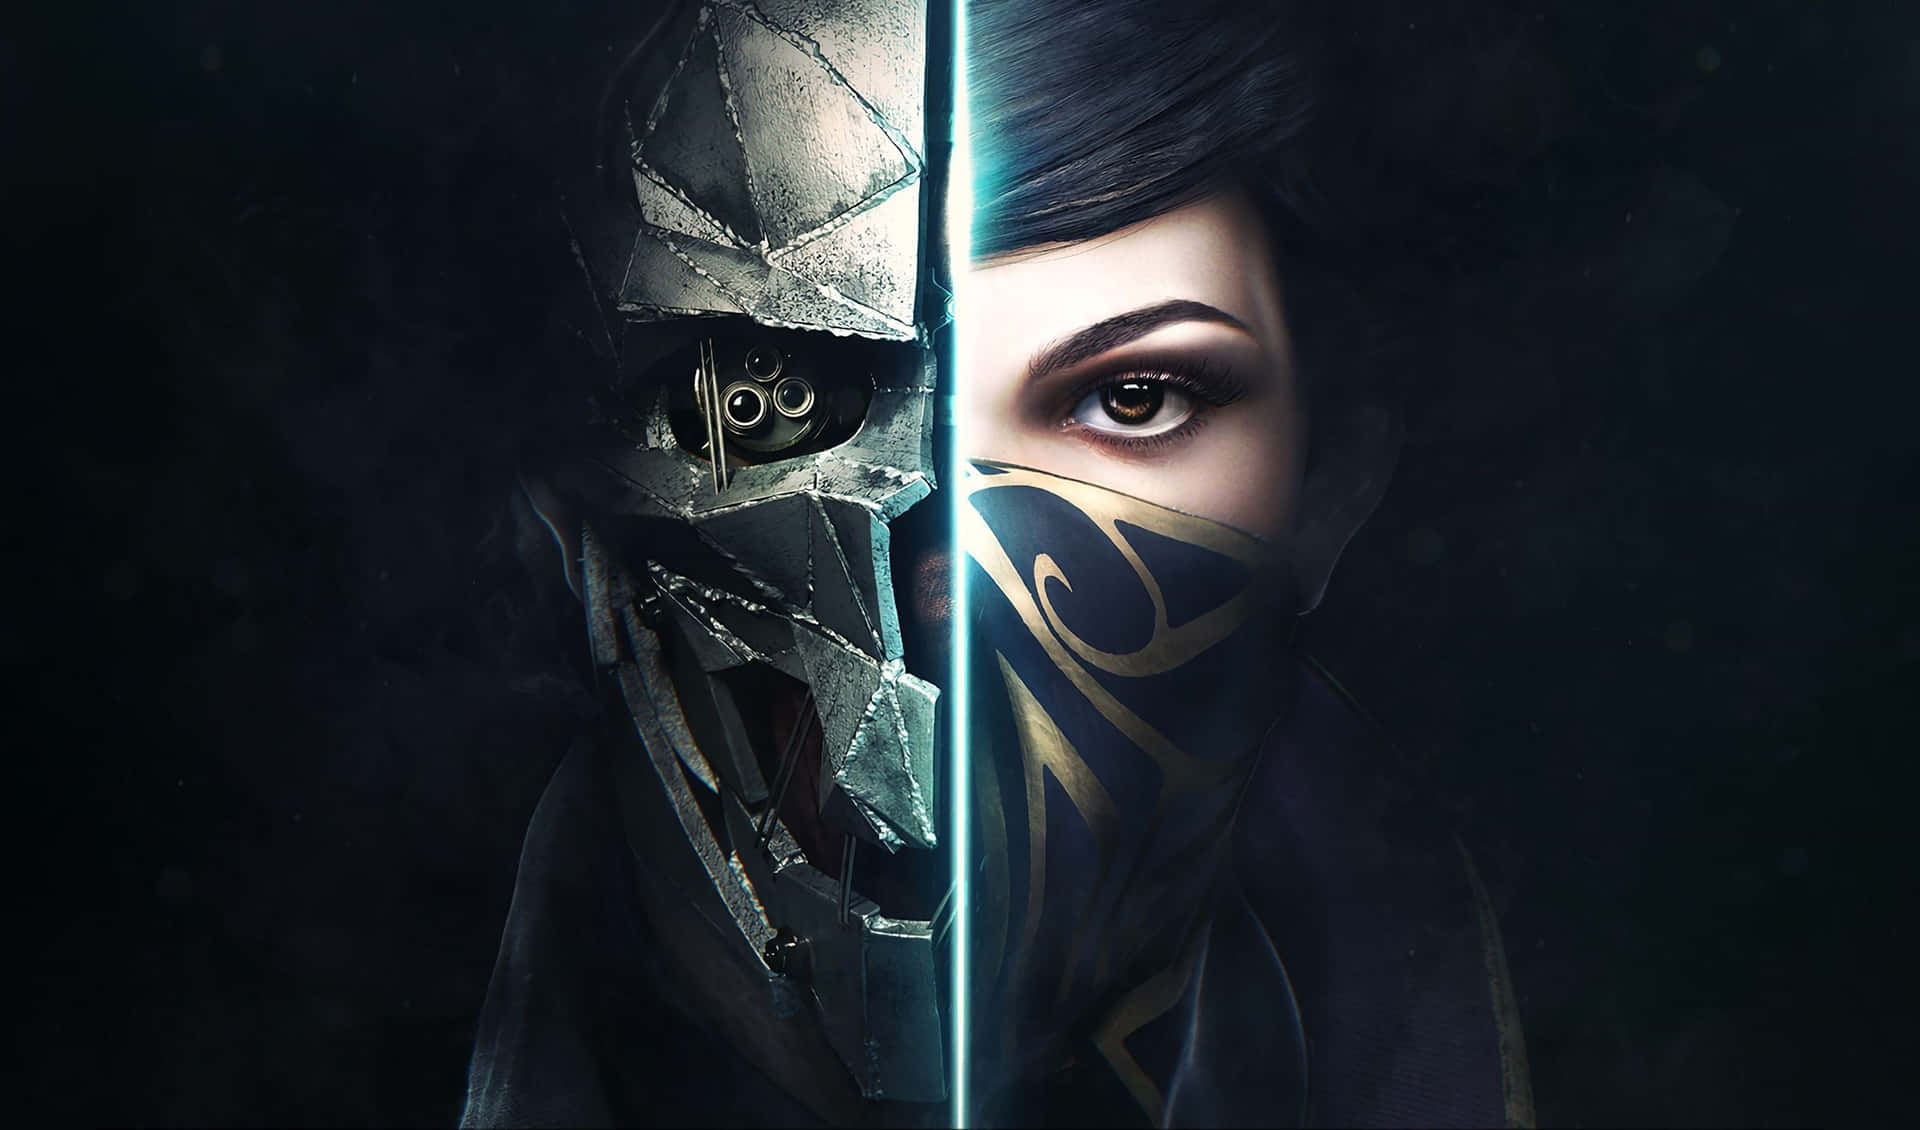 “Explore a Dark World of Magic and Intrigue with 4K Dishonored.” Wallpaper